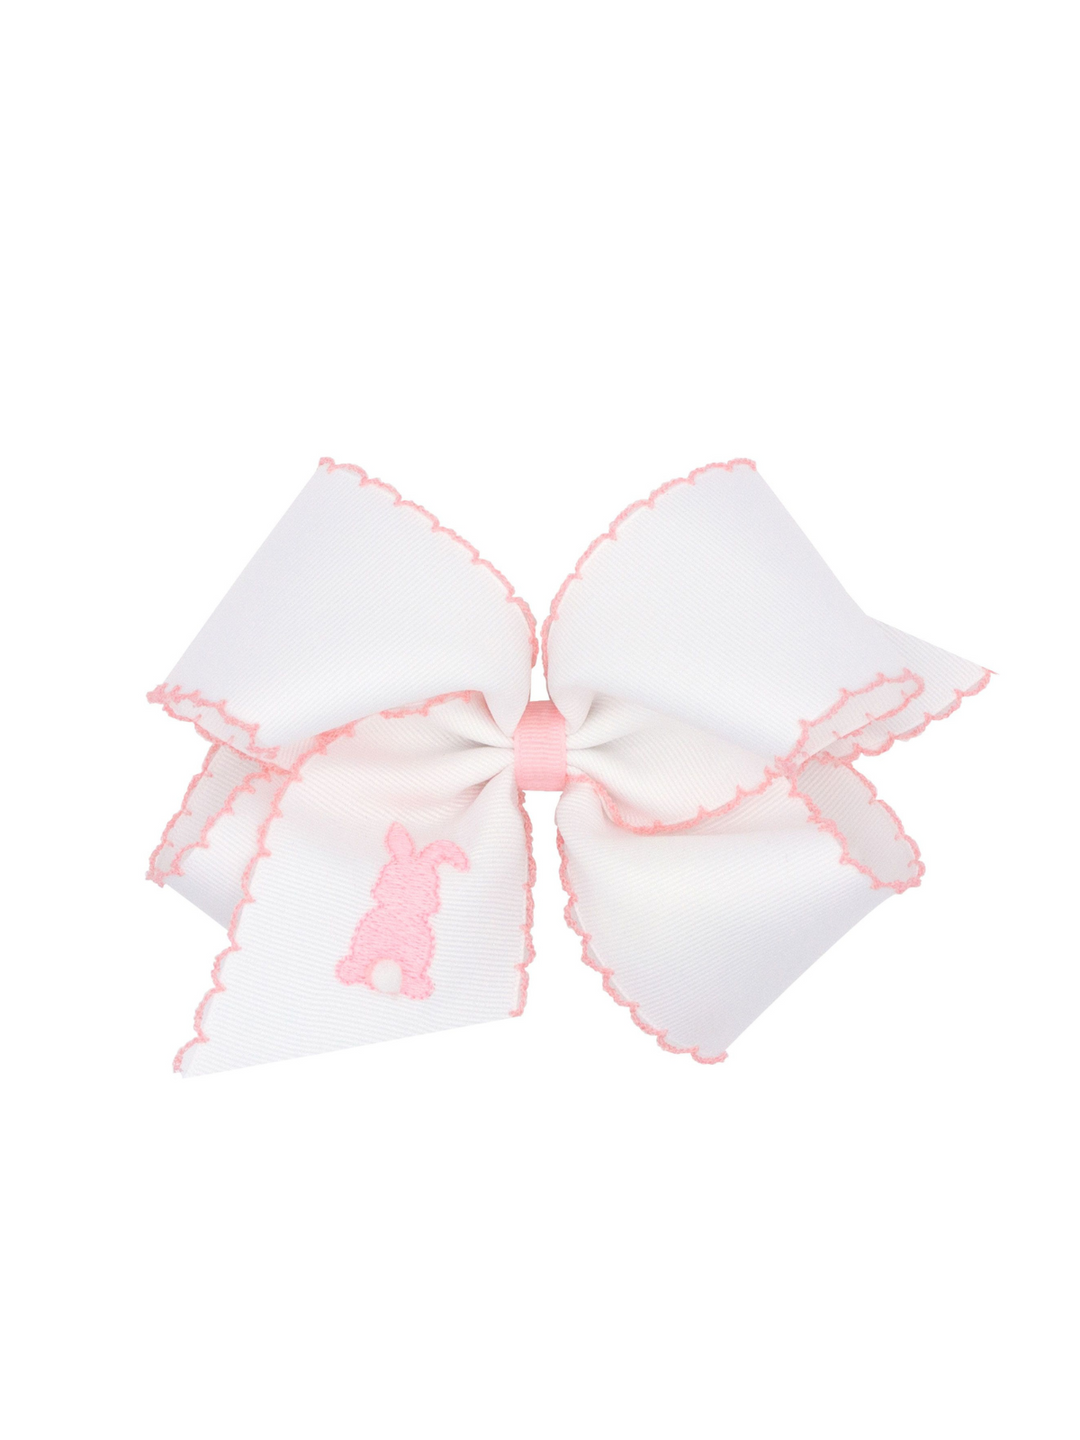 Embroidered PInk Bunny Moonstitch King Bow | Wee Ones